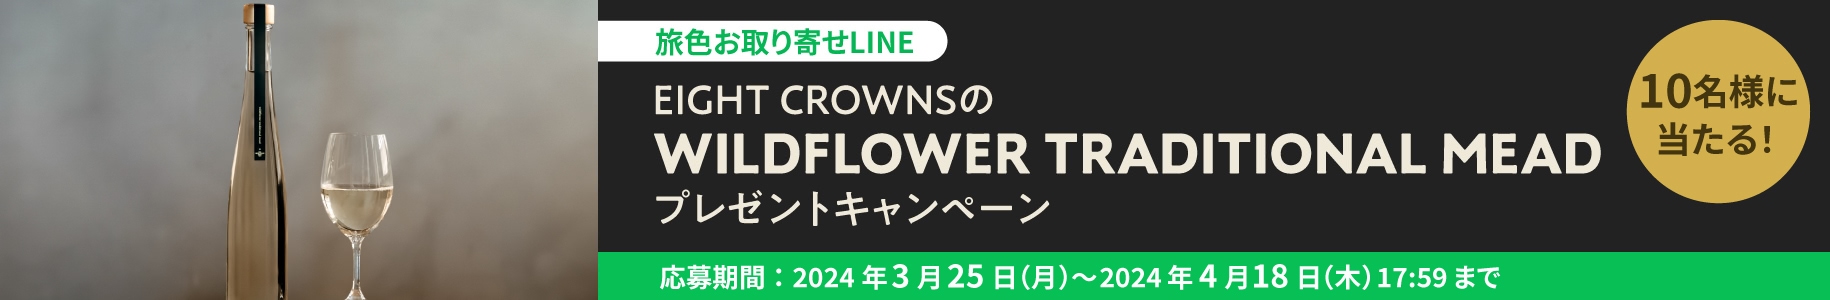 EIGHT CROWNSの「WILDFLOWER TRADITIONAL MEAD」プレゼントキャンペーン